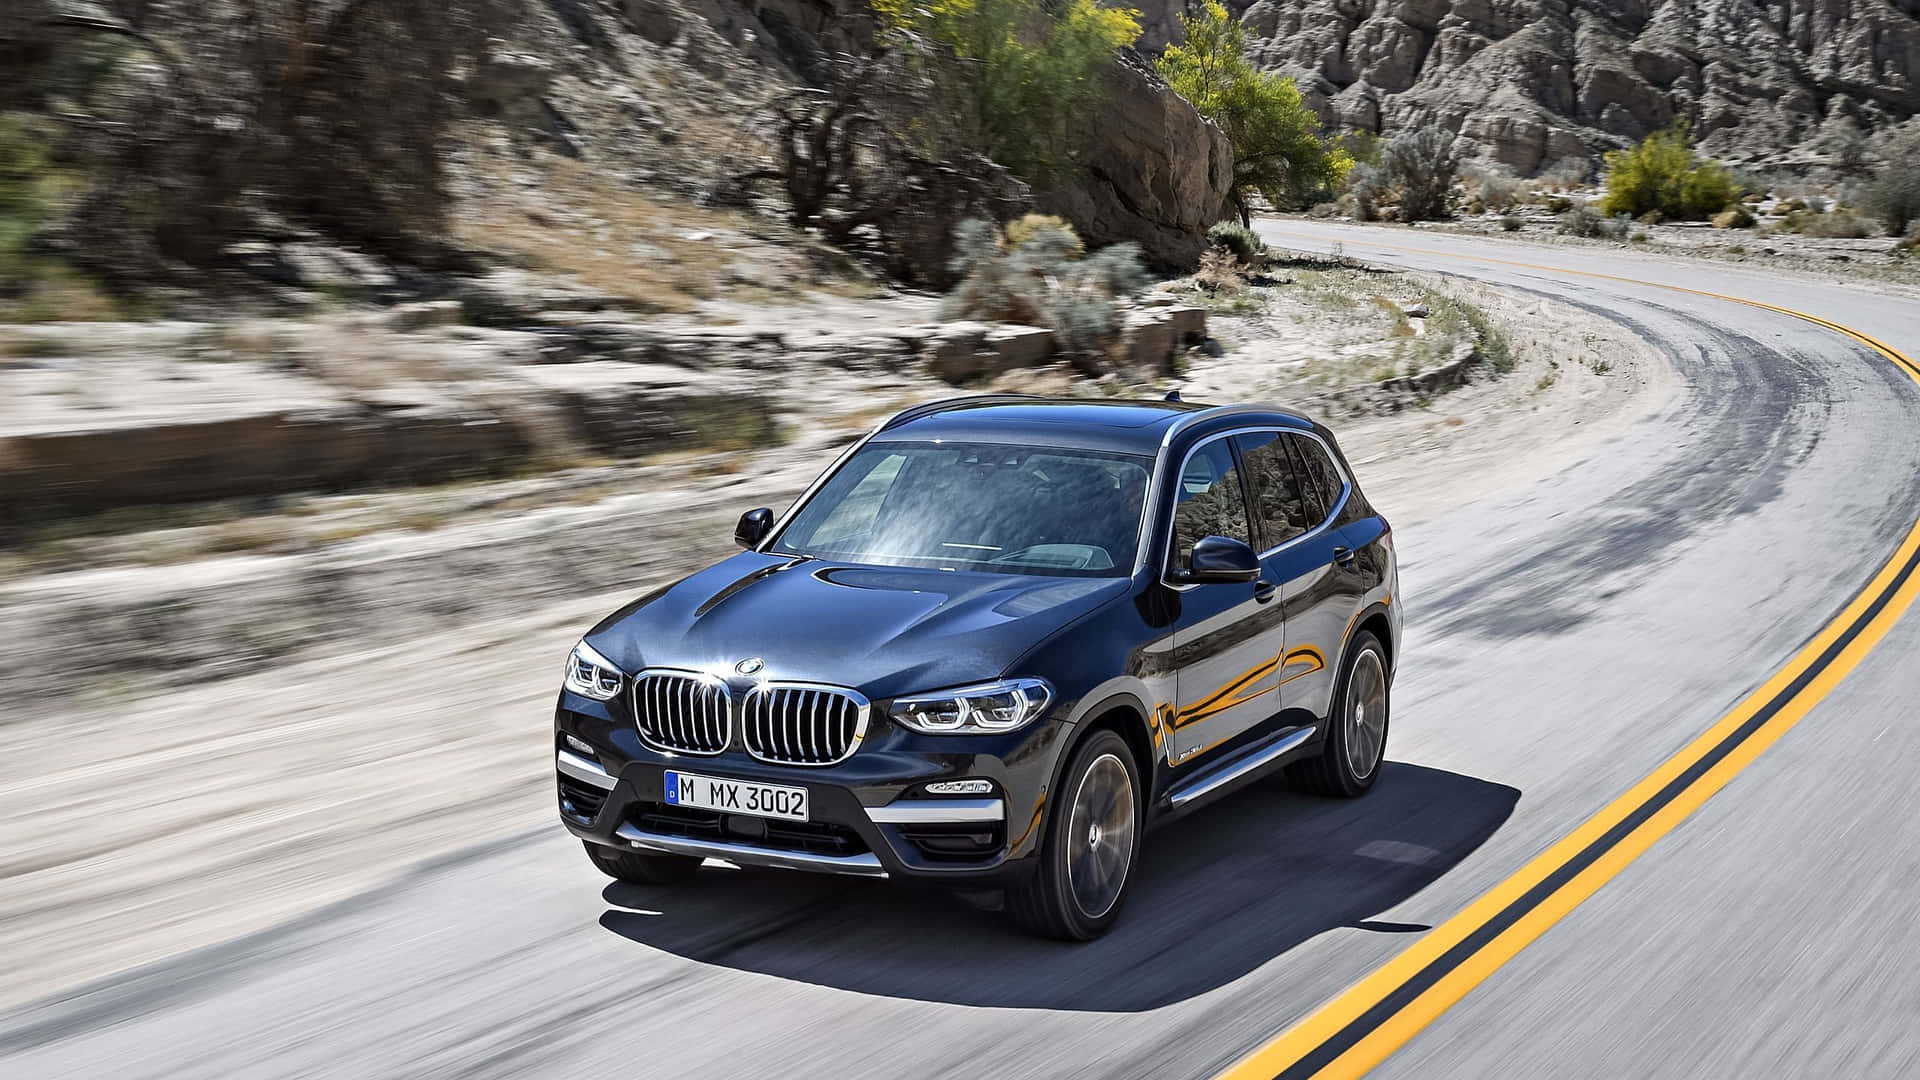 BMW X3 gliding on a scenic highway Wallpaper